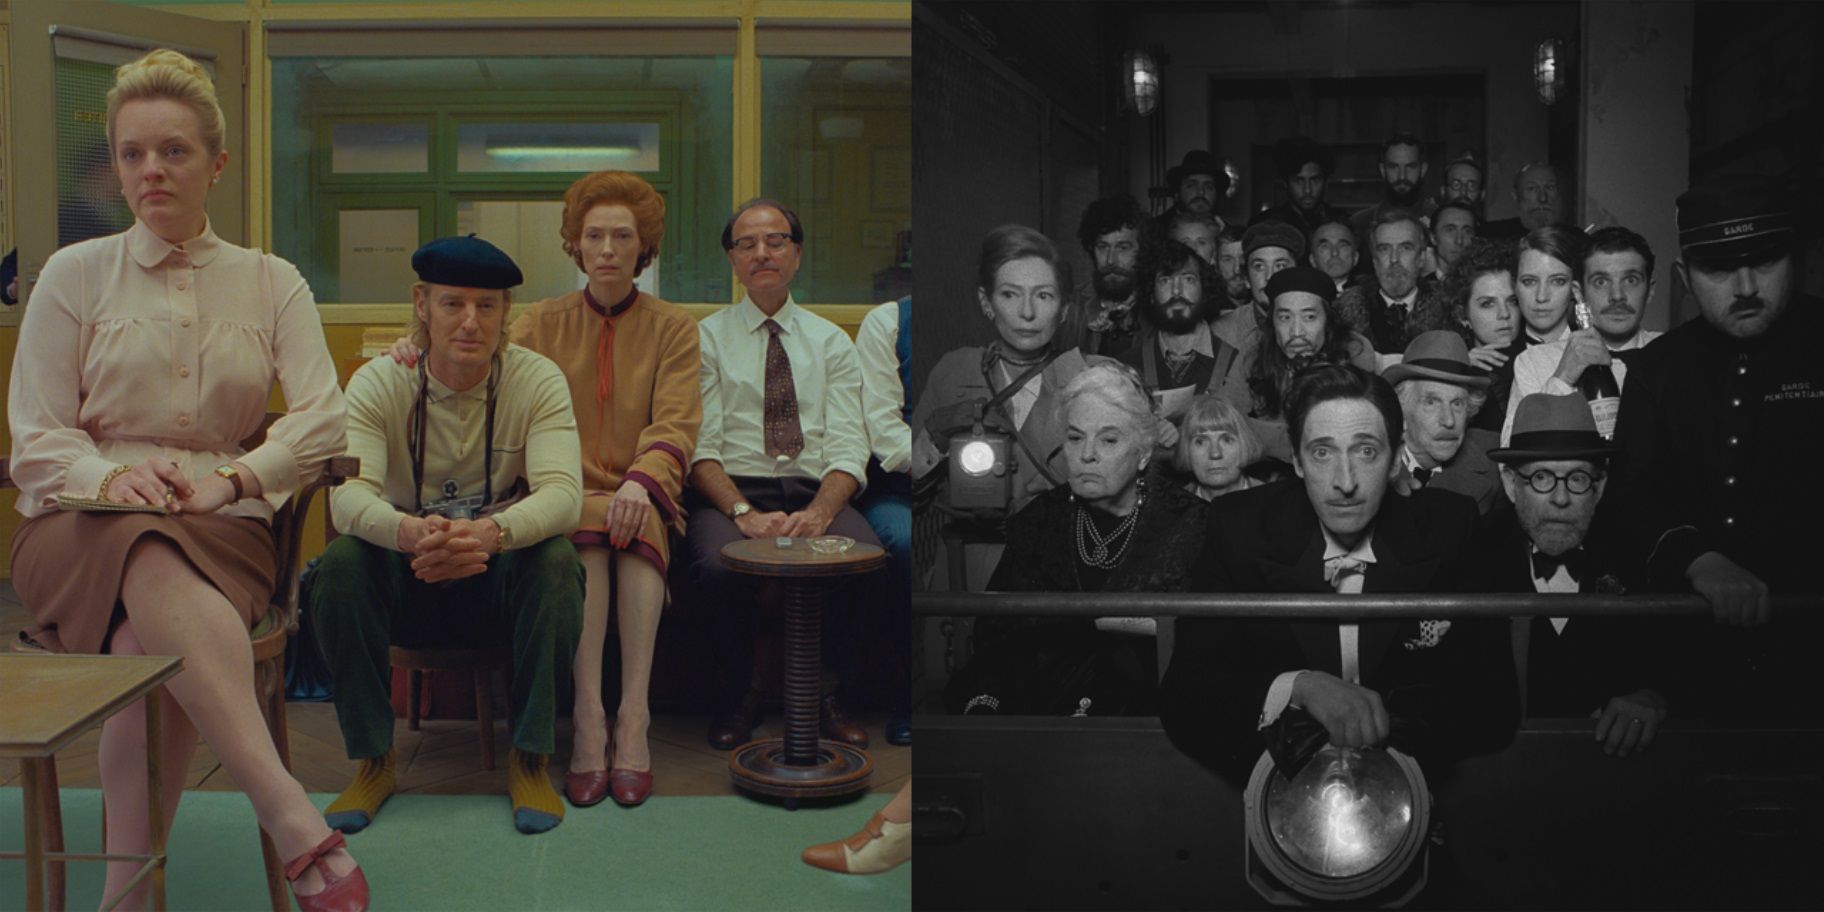 The French Dispatch 10 Wes Anderson Trademarks In The Movie